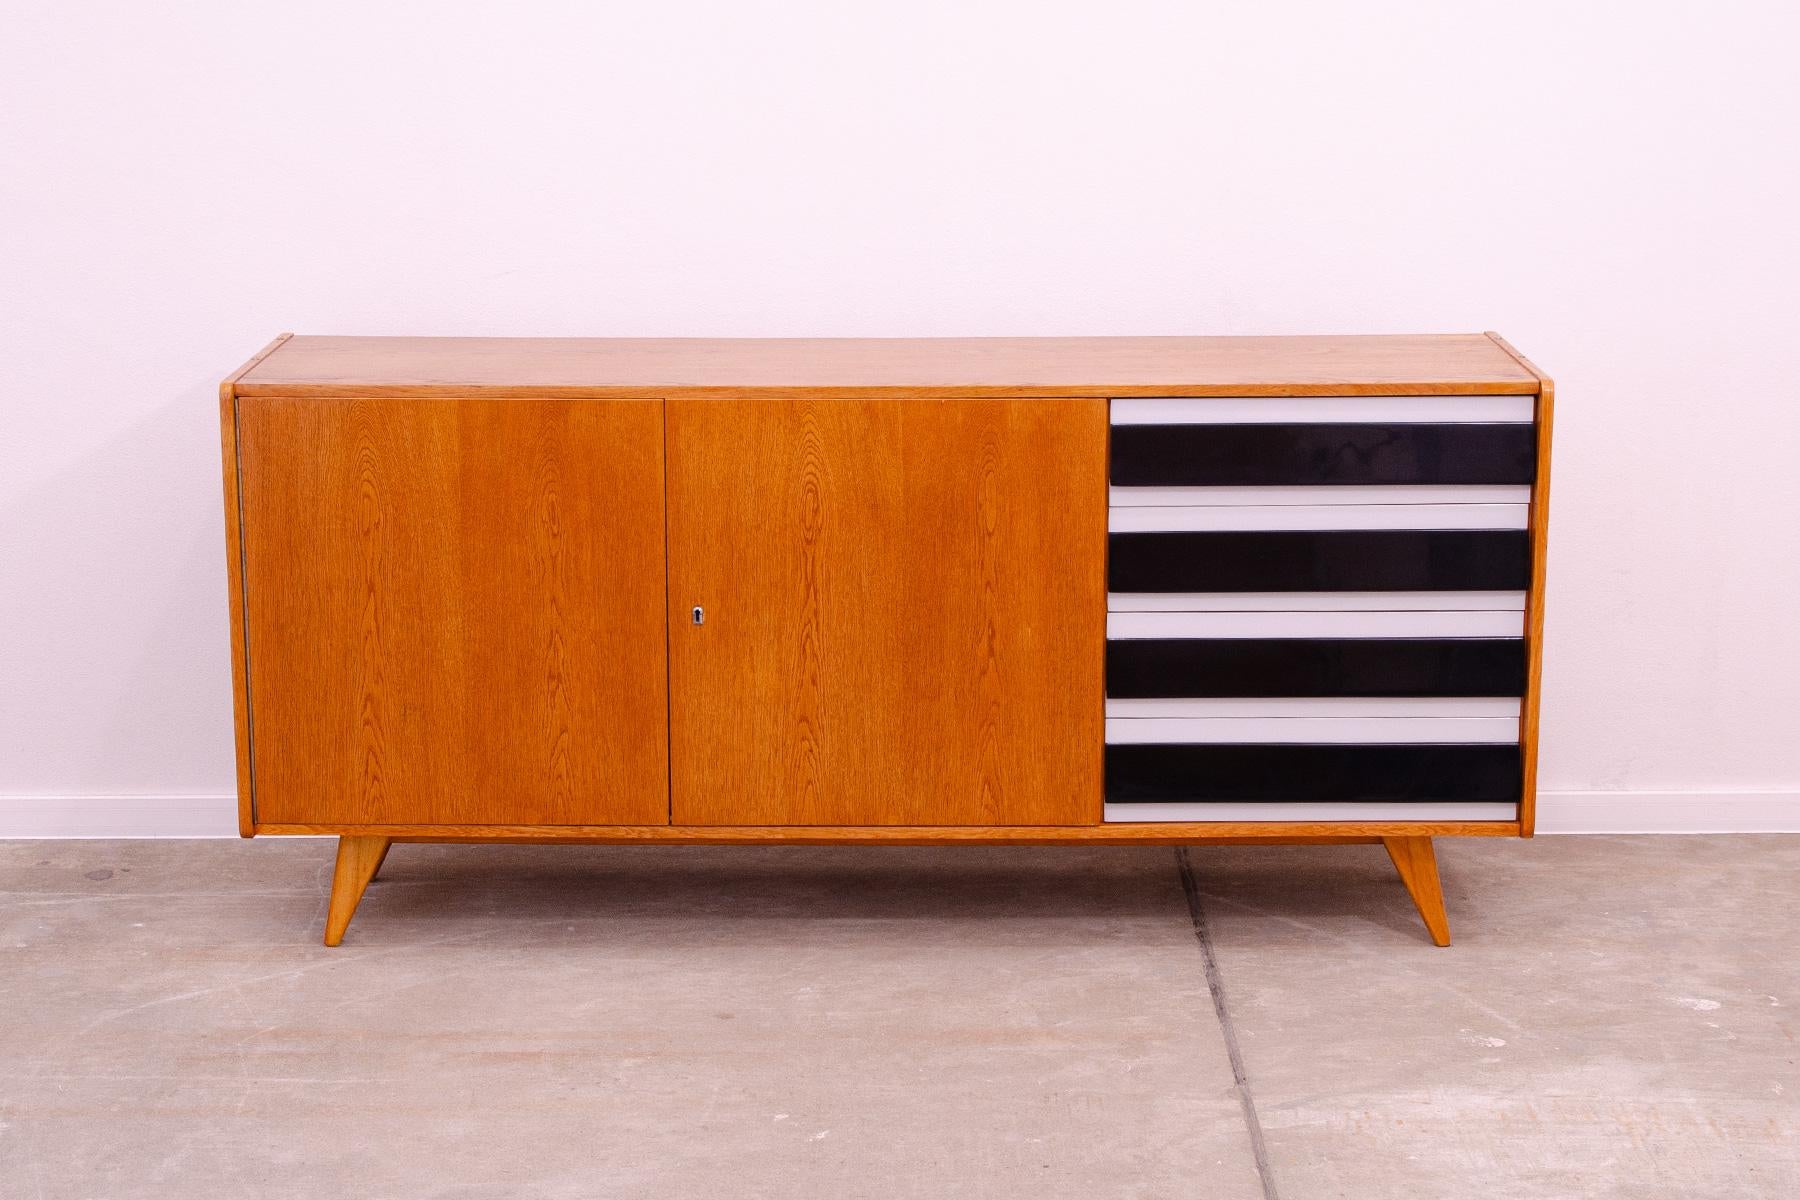 A popular Vintage sideboard model U-460 from the 1960´s. It was designed by Jiri Jiroutek for Interier Praha. It features a beech wood, plywood, colored lacquered drawers. In excellent condition, fully refurbished.

Height: 76 cm, lenght: 165 cm,